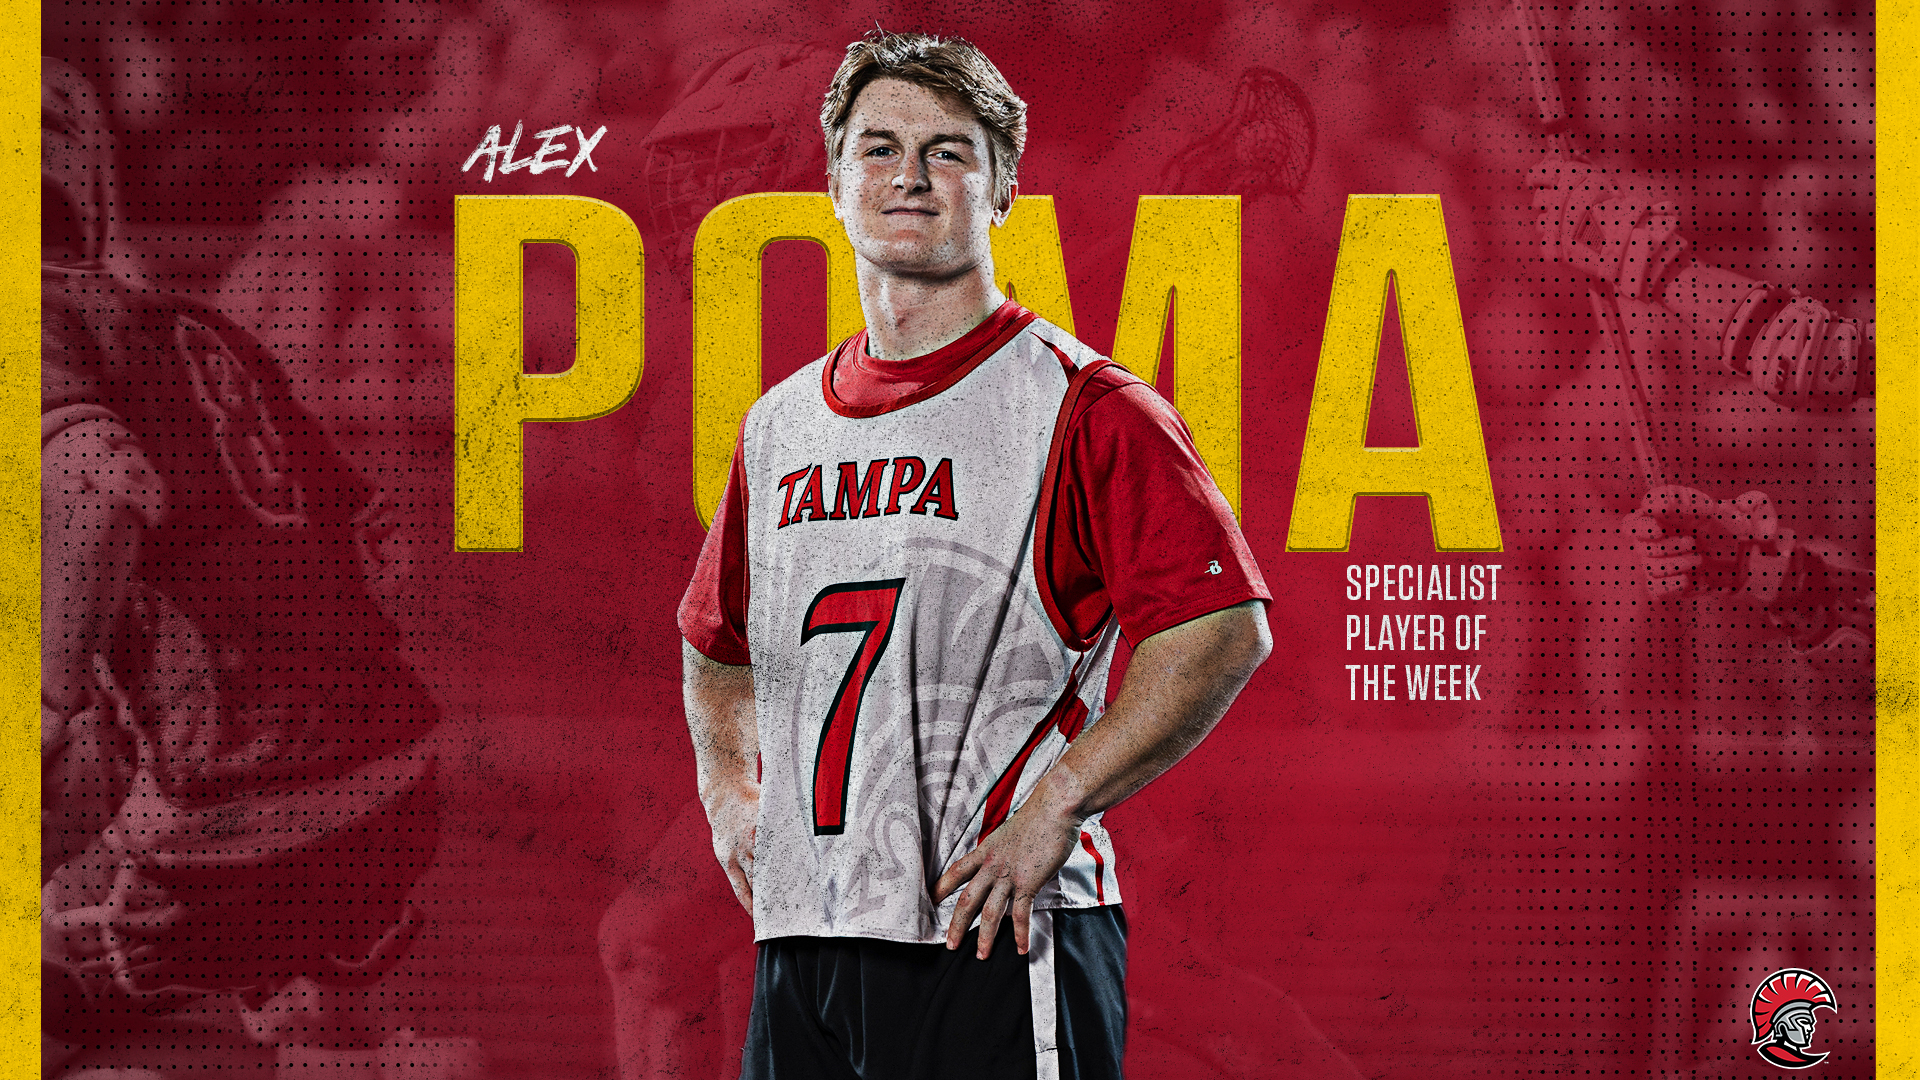 Alex Poma Named Specialist Player of the Week by SSC